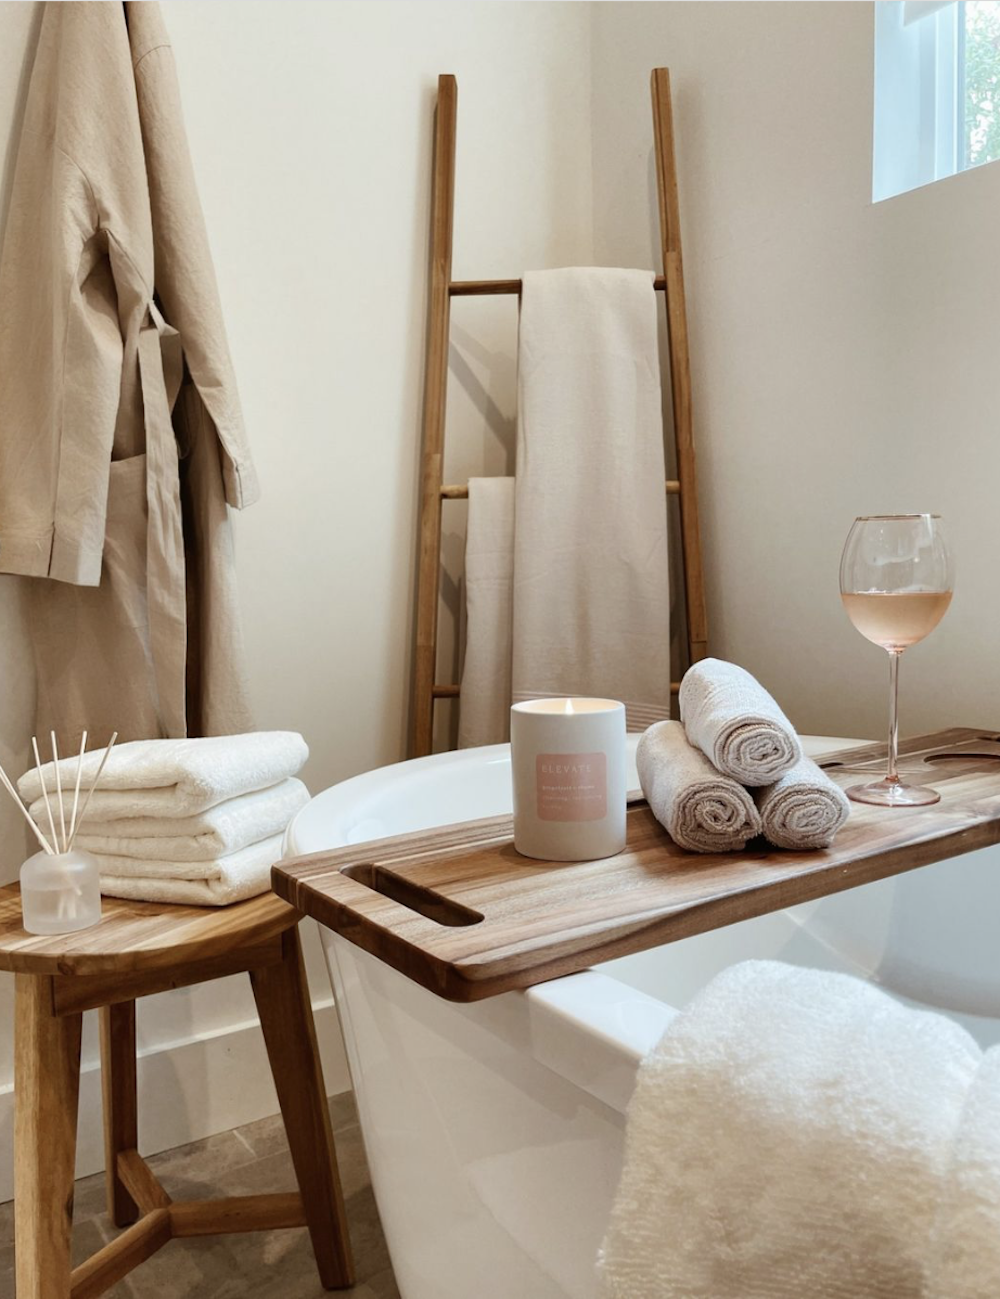 image of a bathroom tub with a spa caddy and white towels